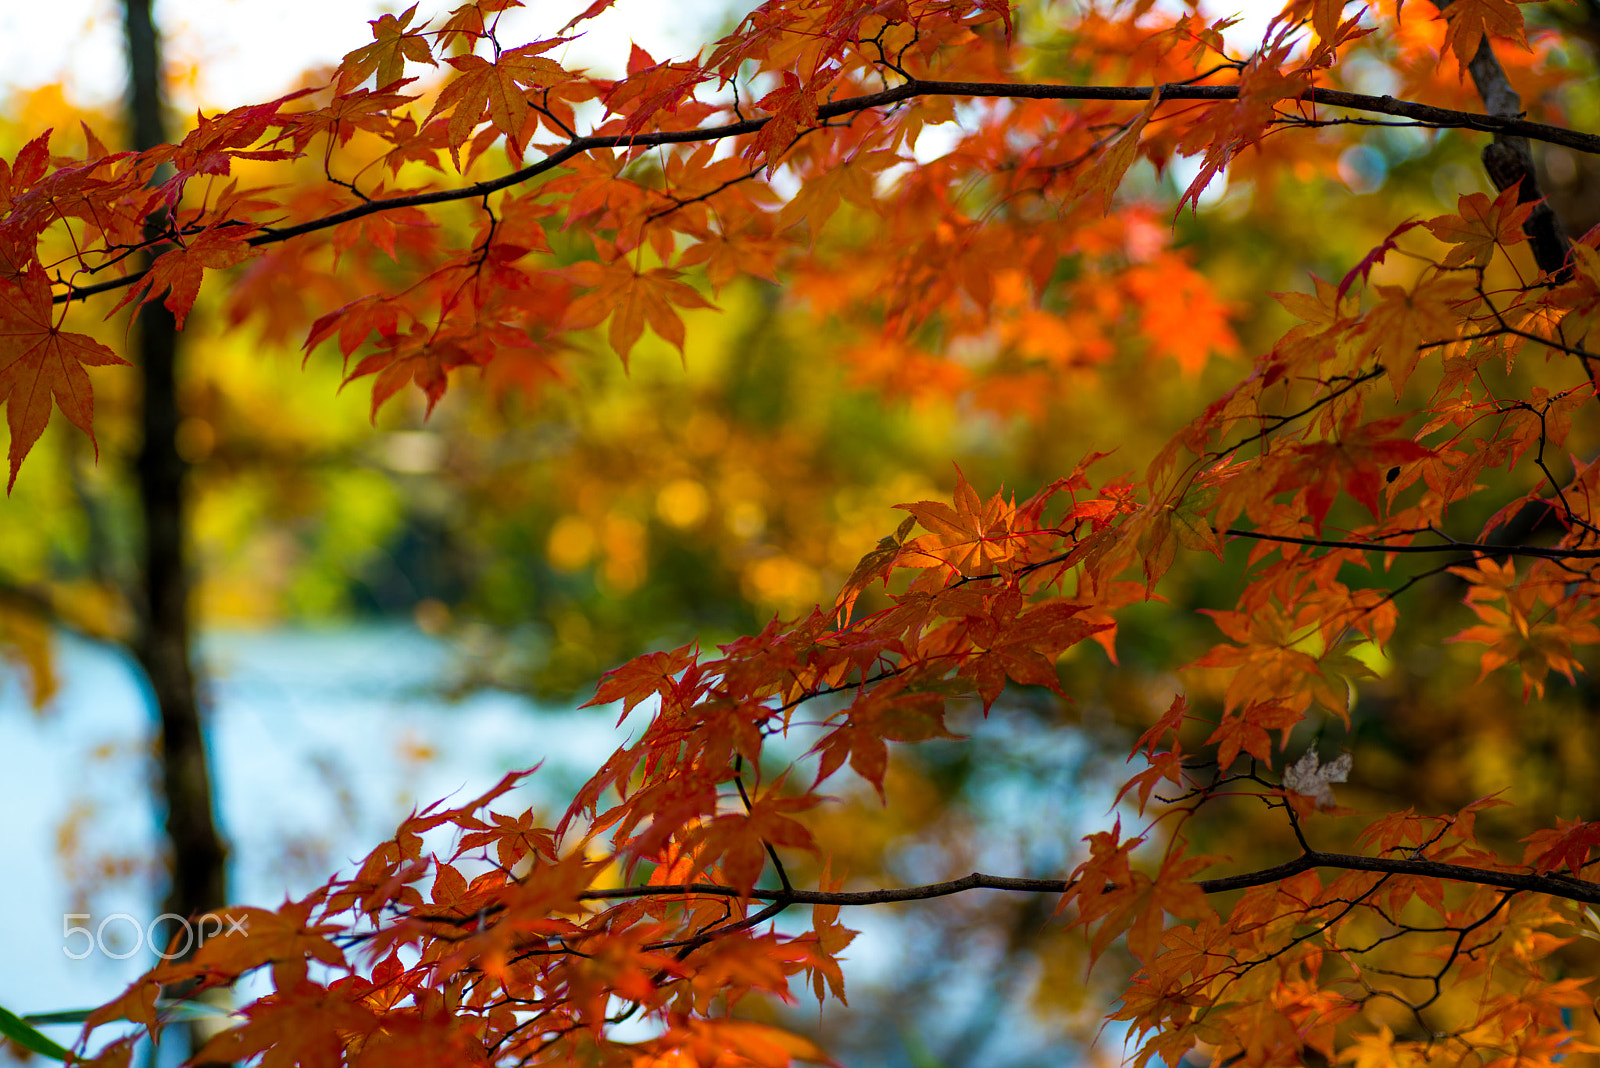 Nikon D800 + Tamron SP 90mm F2.8 Di VC USD 1:1 Macro sample photo. Maple leaves and the pond photography